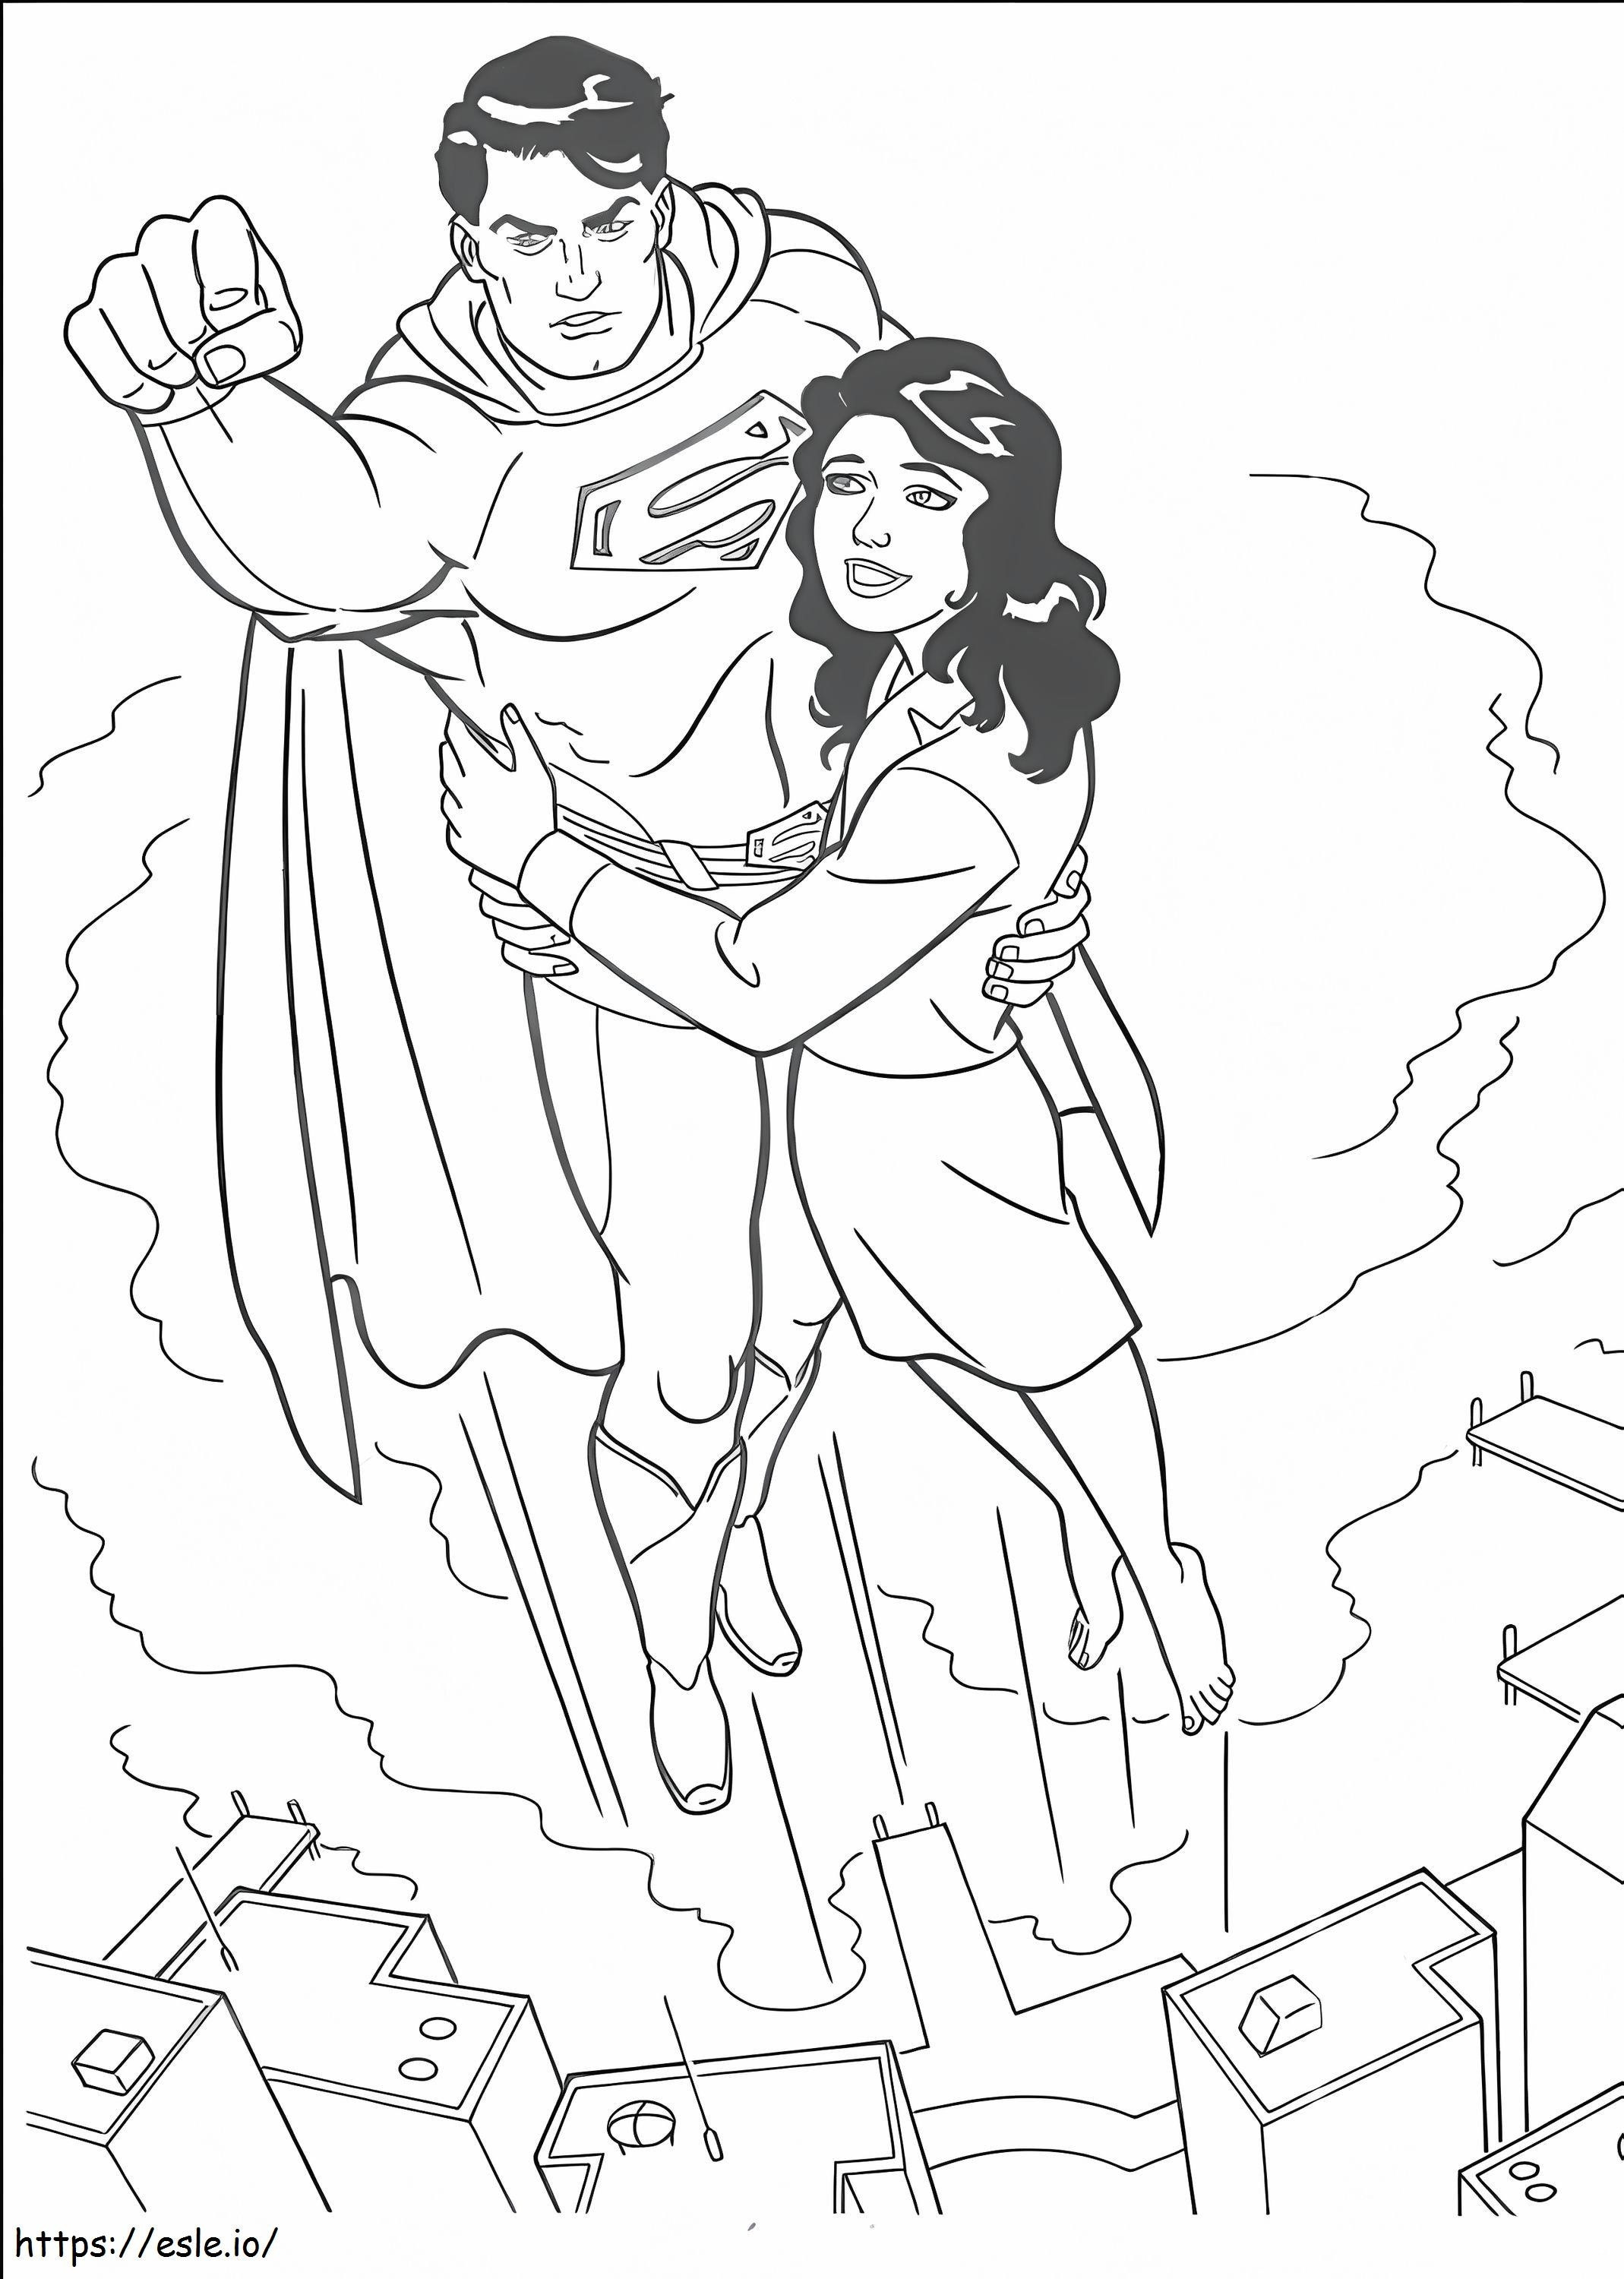 Superman Saves The People 1 coloring page